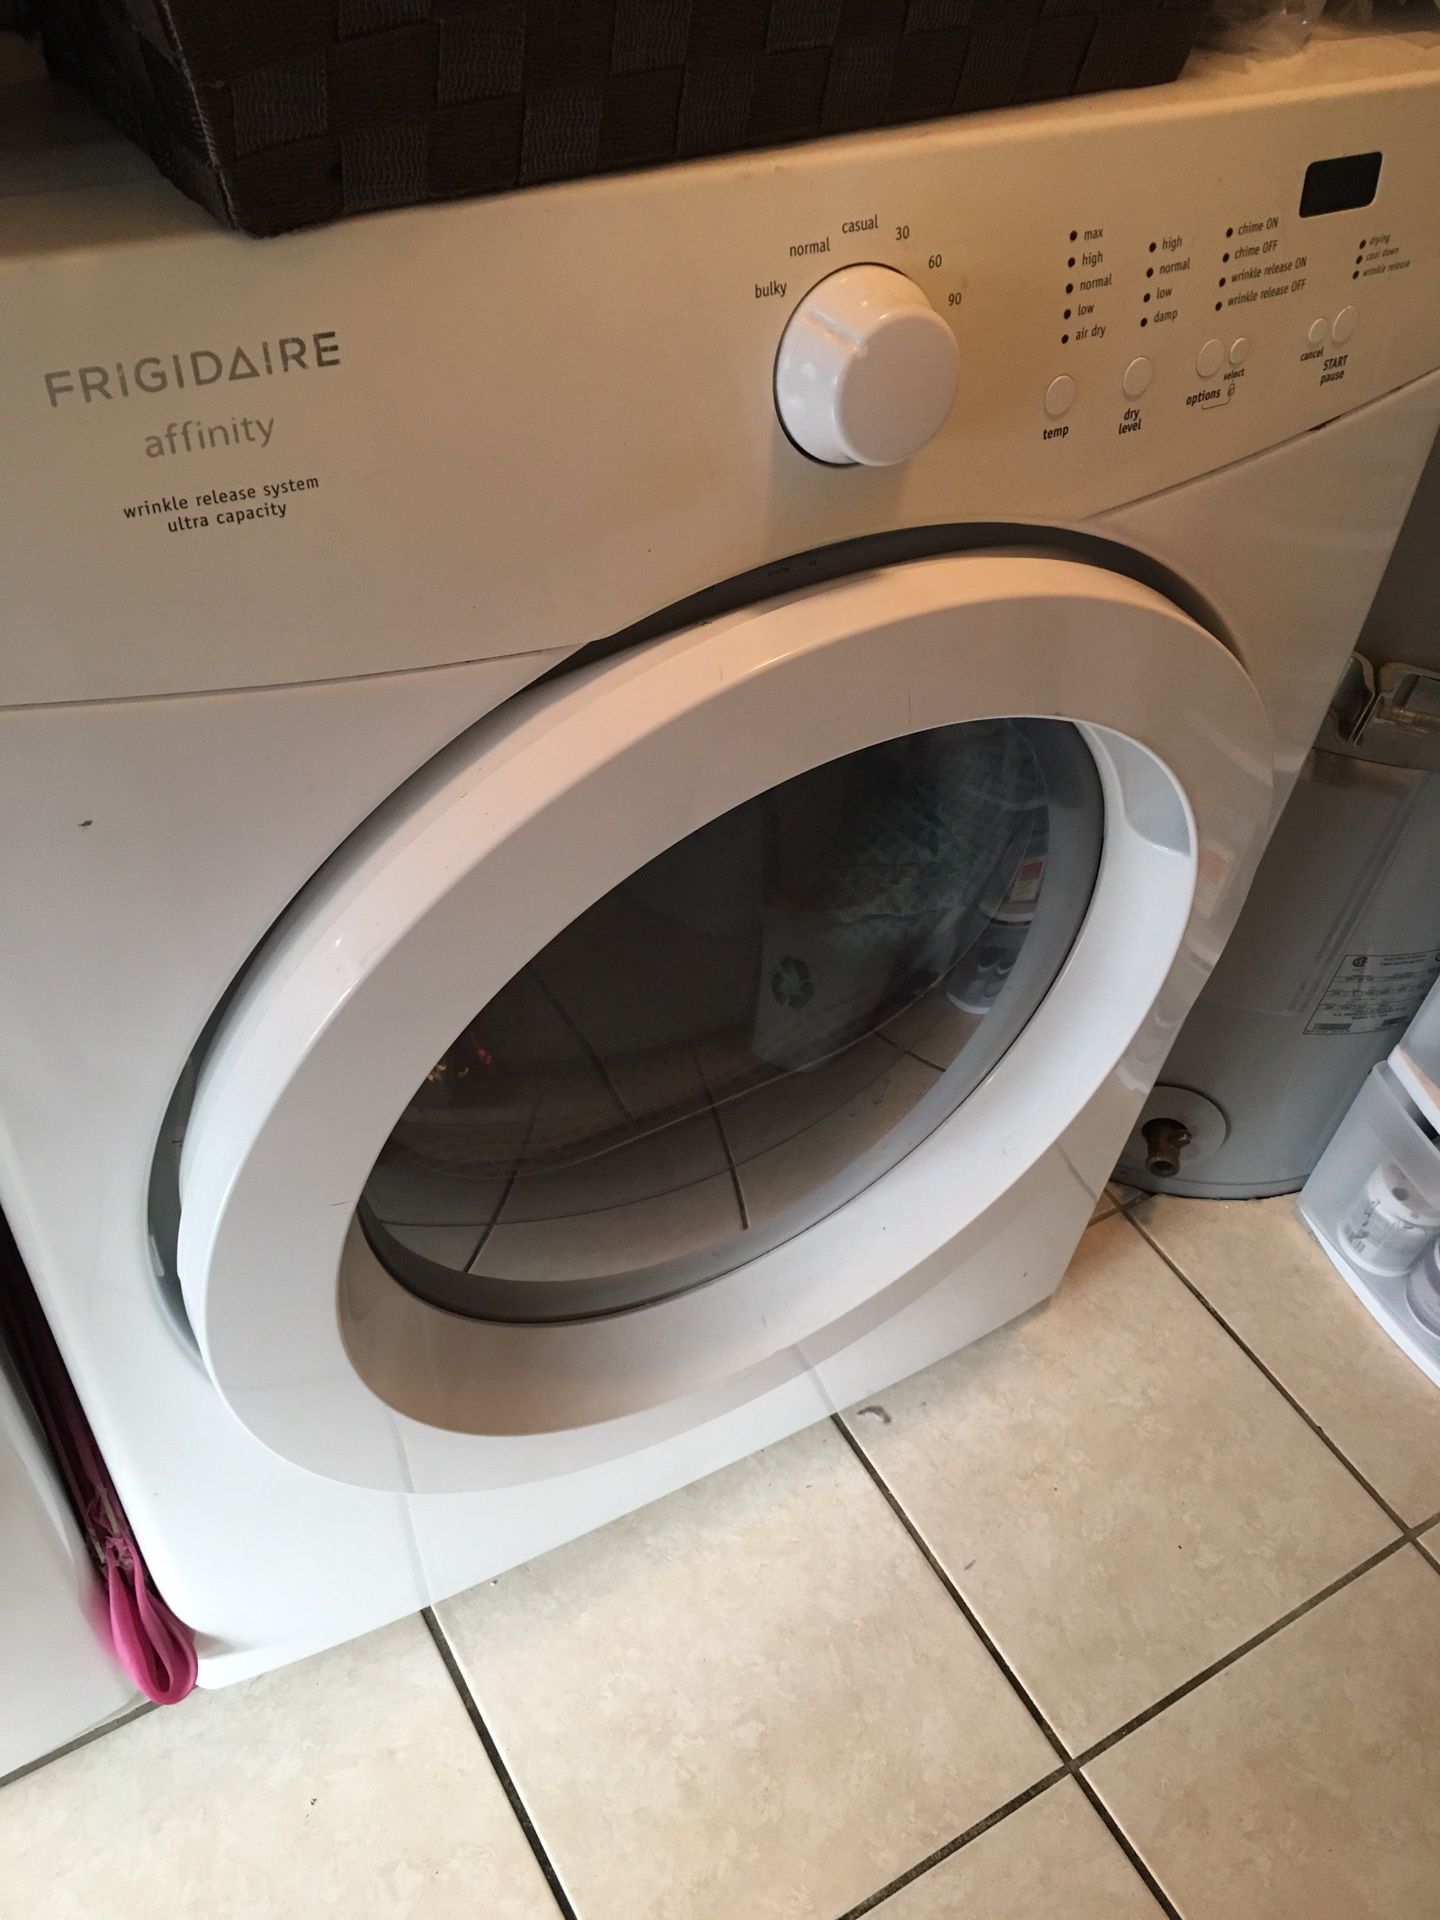 Frigidaire Affinity washer and dryer